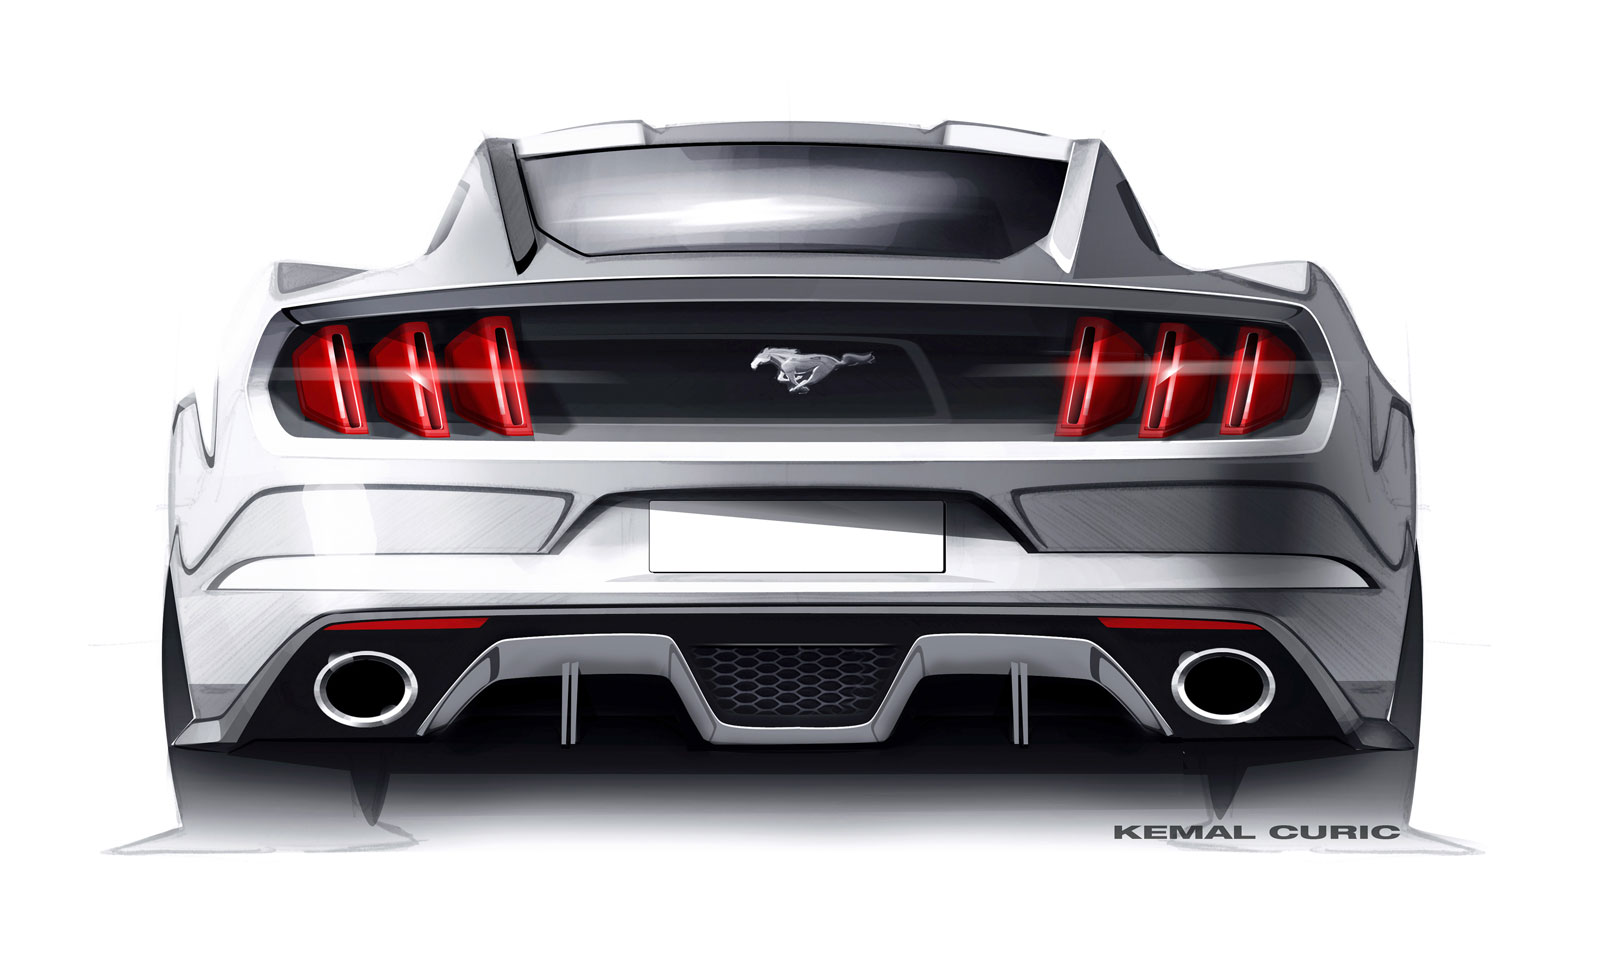 S650 Mustang chazcron weighs in... 7th gen 2023 Mustang S650 3D model & renderings in several colors! 5F006126-8A7E-4335-AC15-9FC8C24264A8